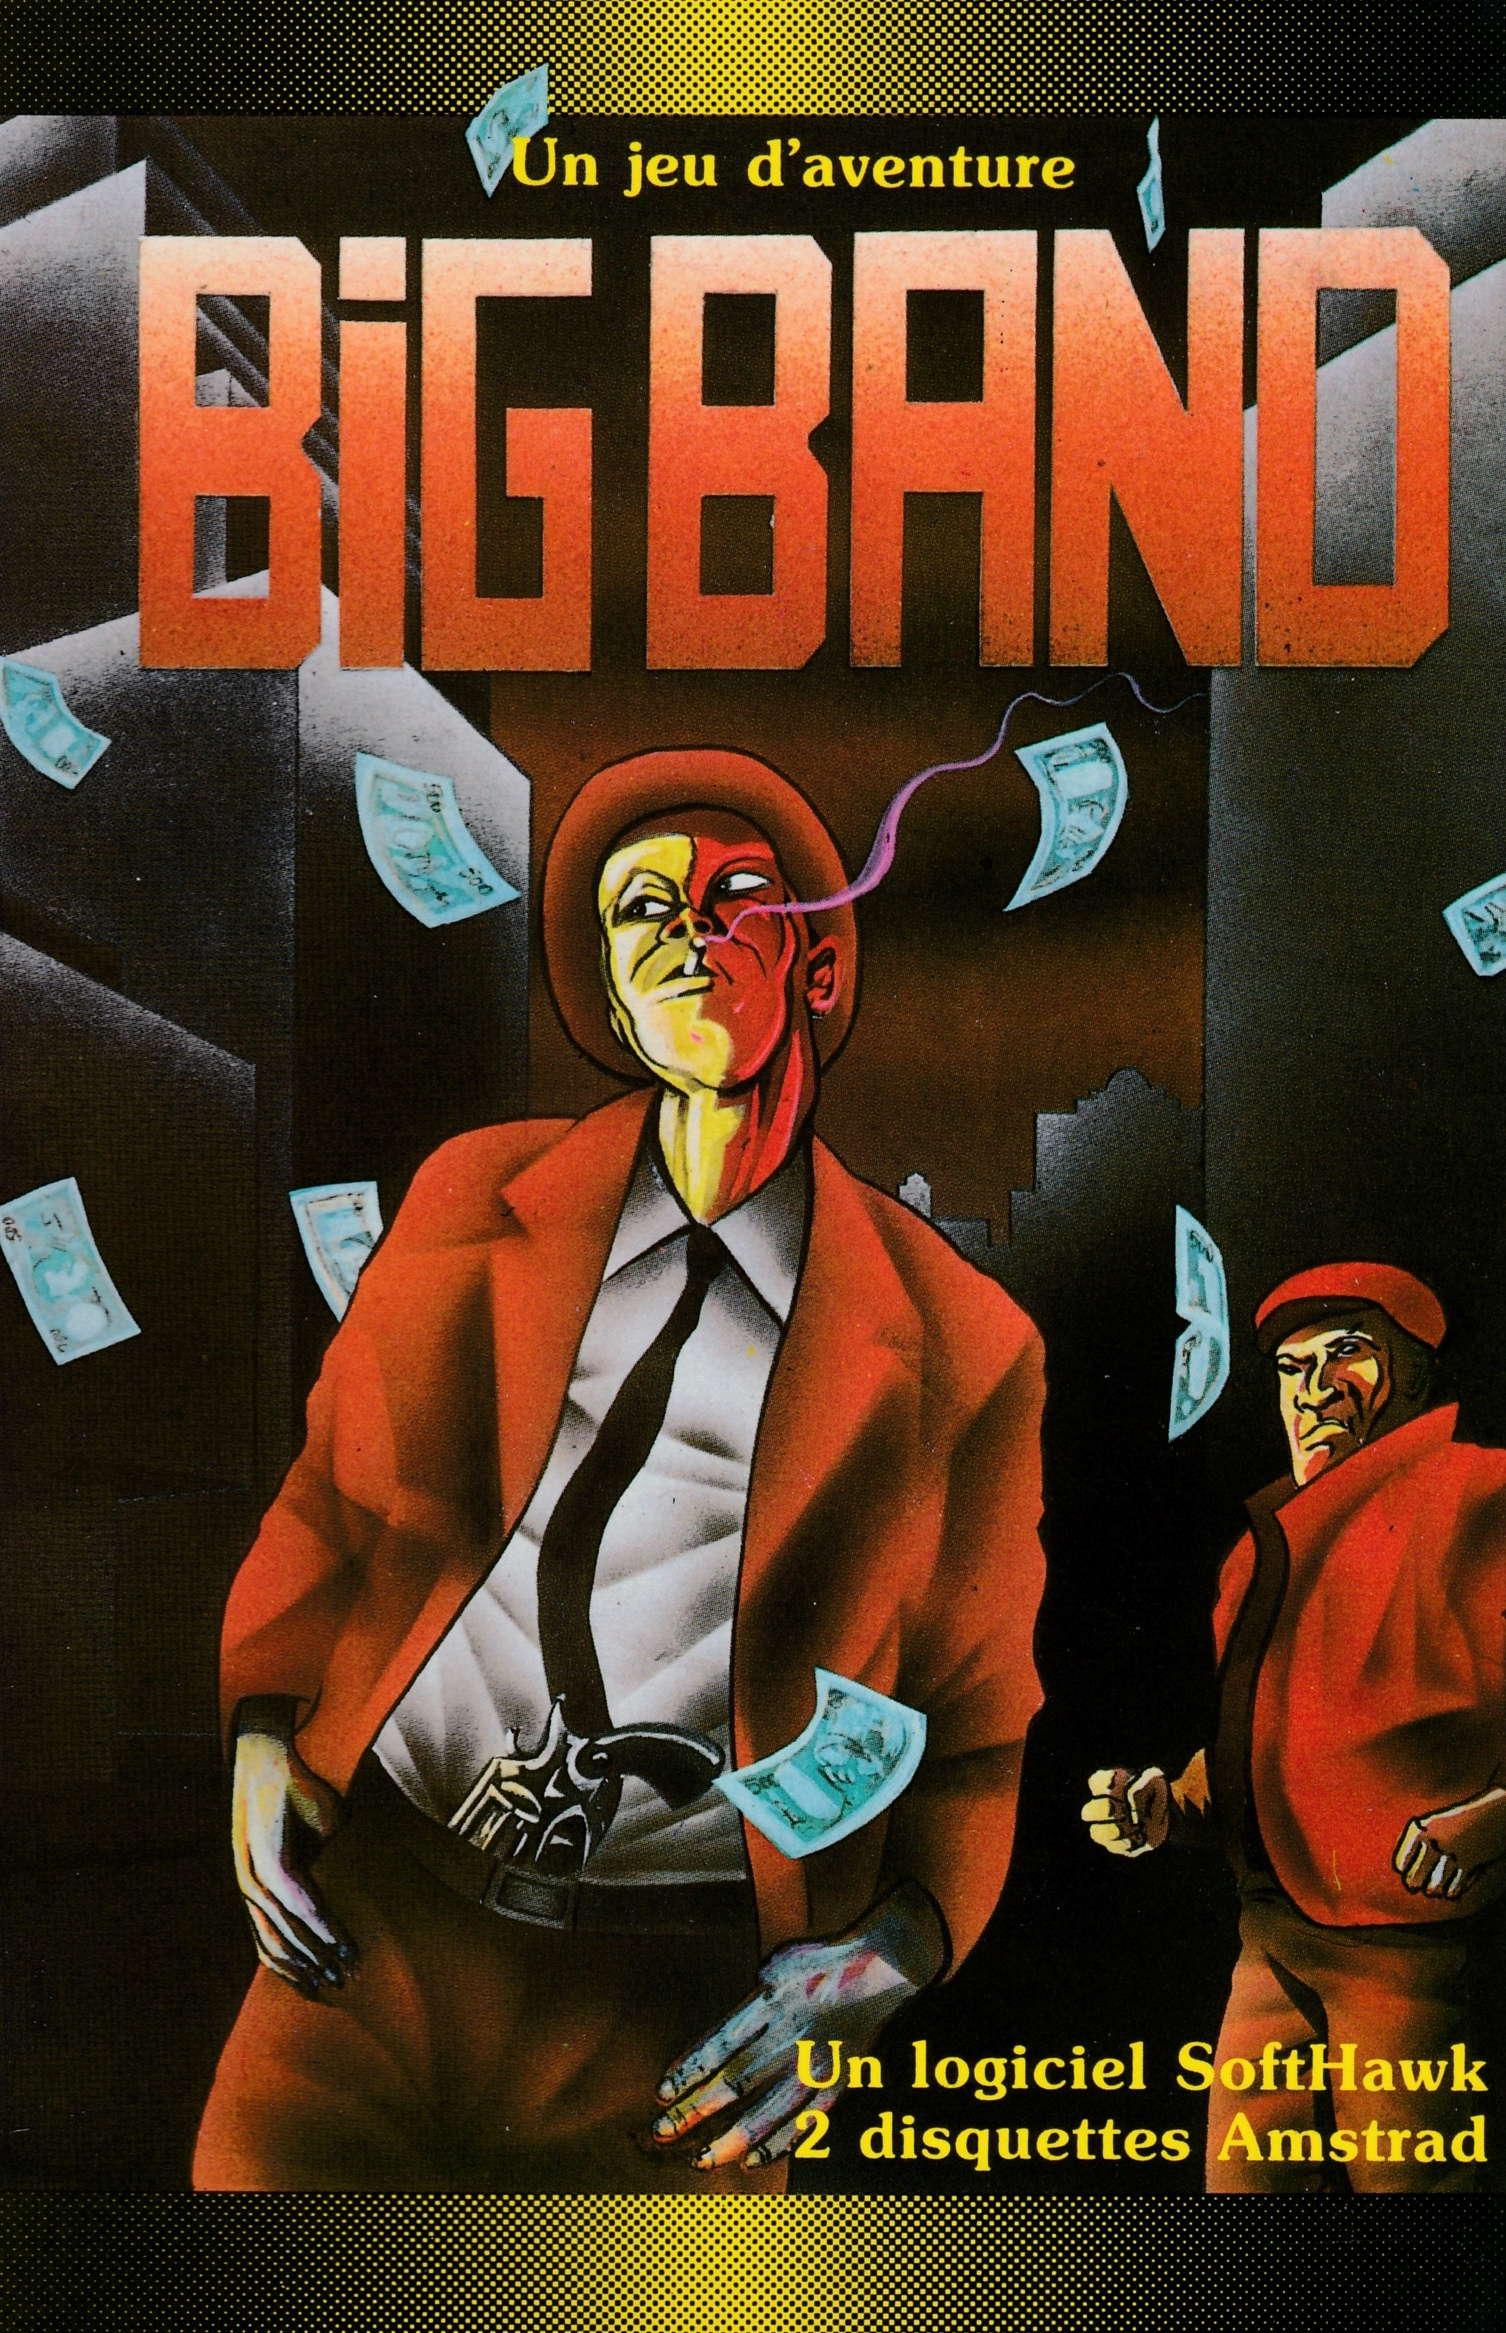 cover of the Amstrad CPC game Big Band  by GameBase CPC